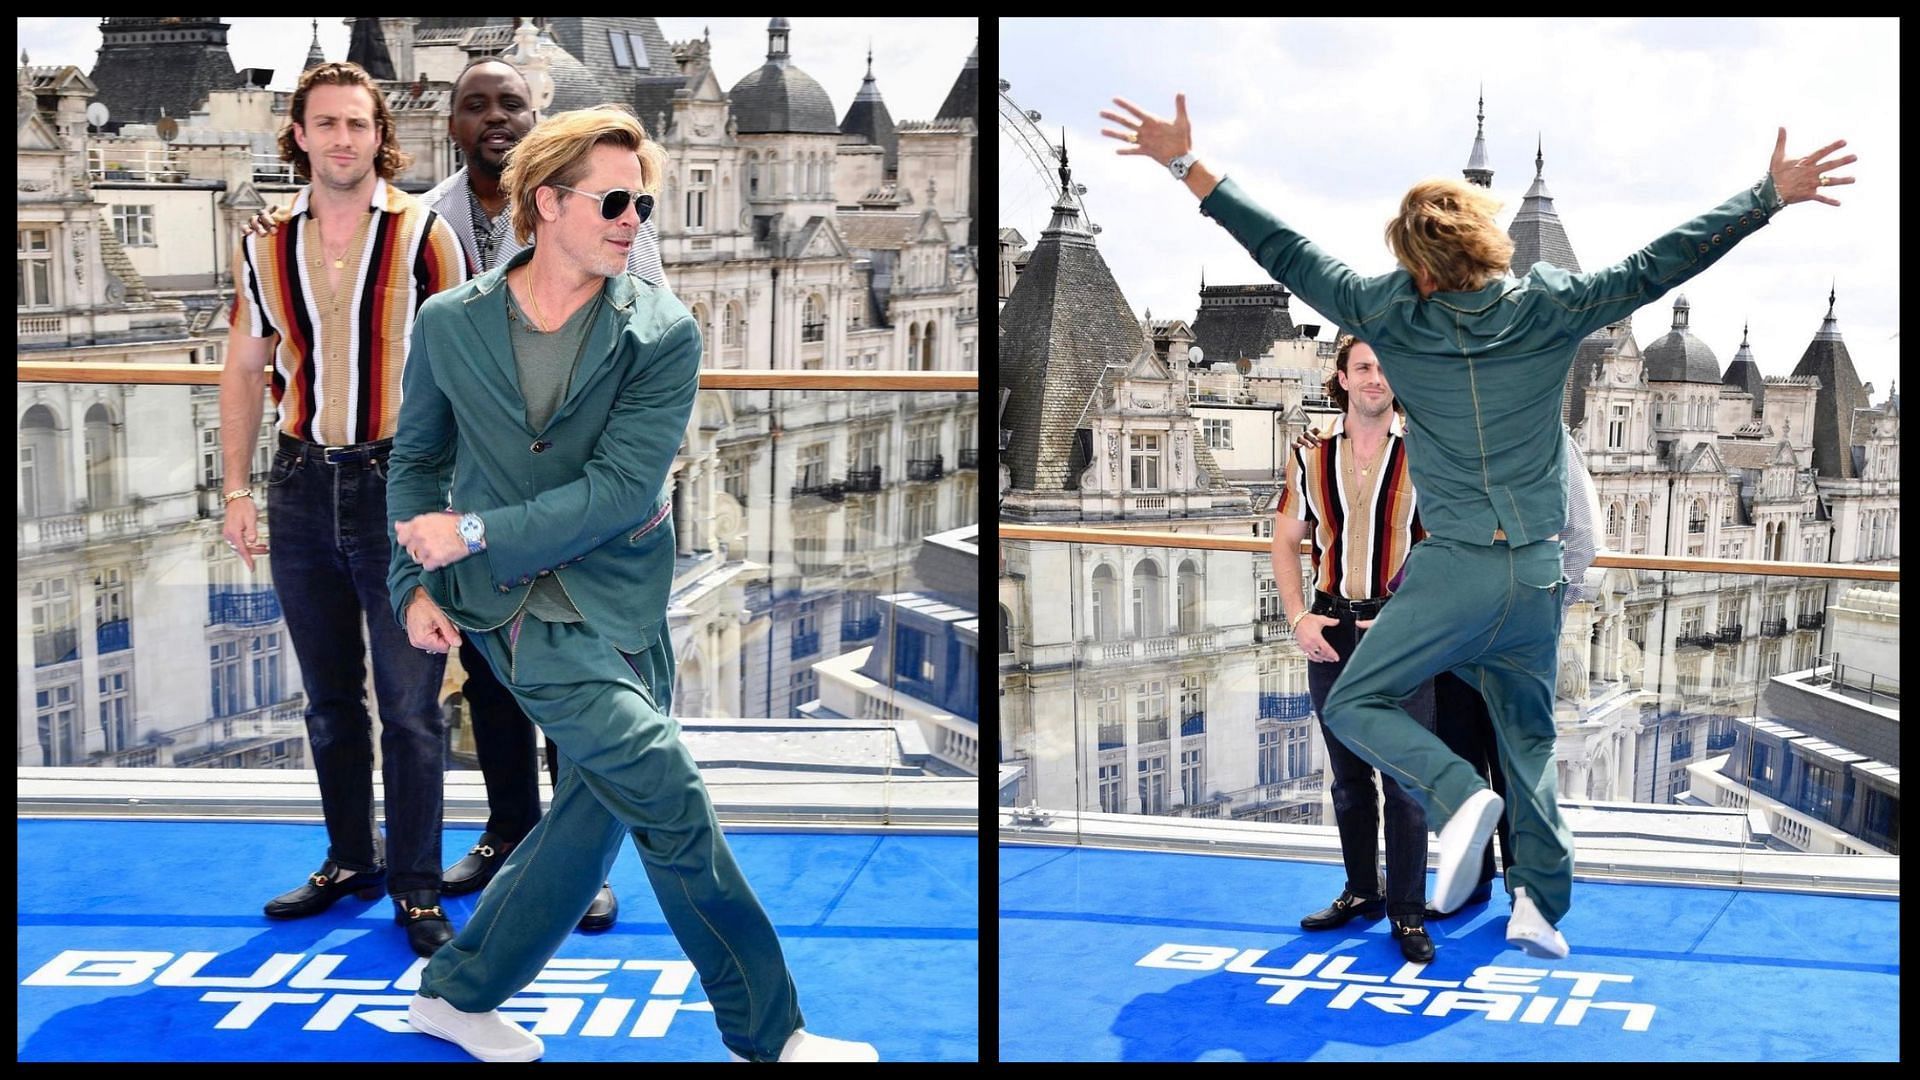 Pitt sported a teal-colored suit for a photocall in London (Image via Instagram/@bradpittdiaries)